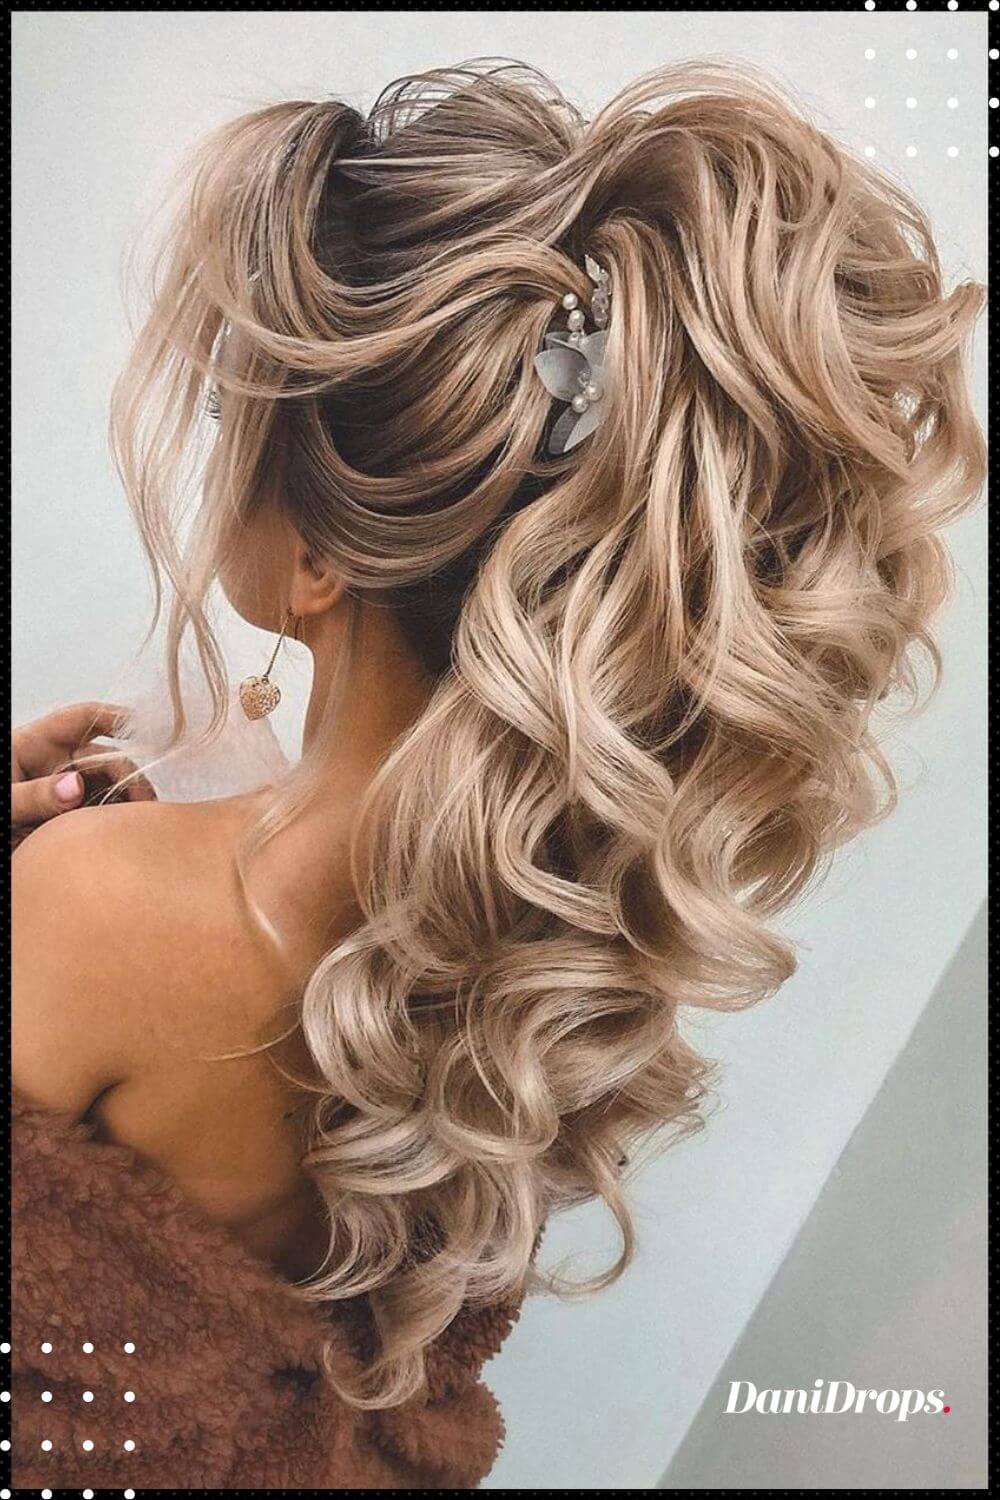 10 hairstyles for long hair to make you feel like a queen